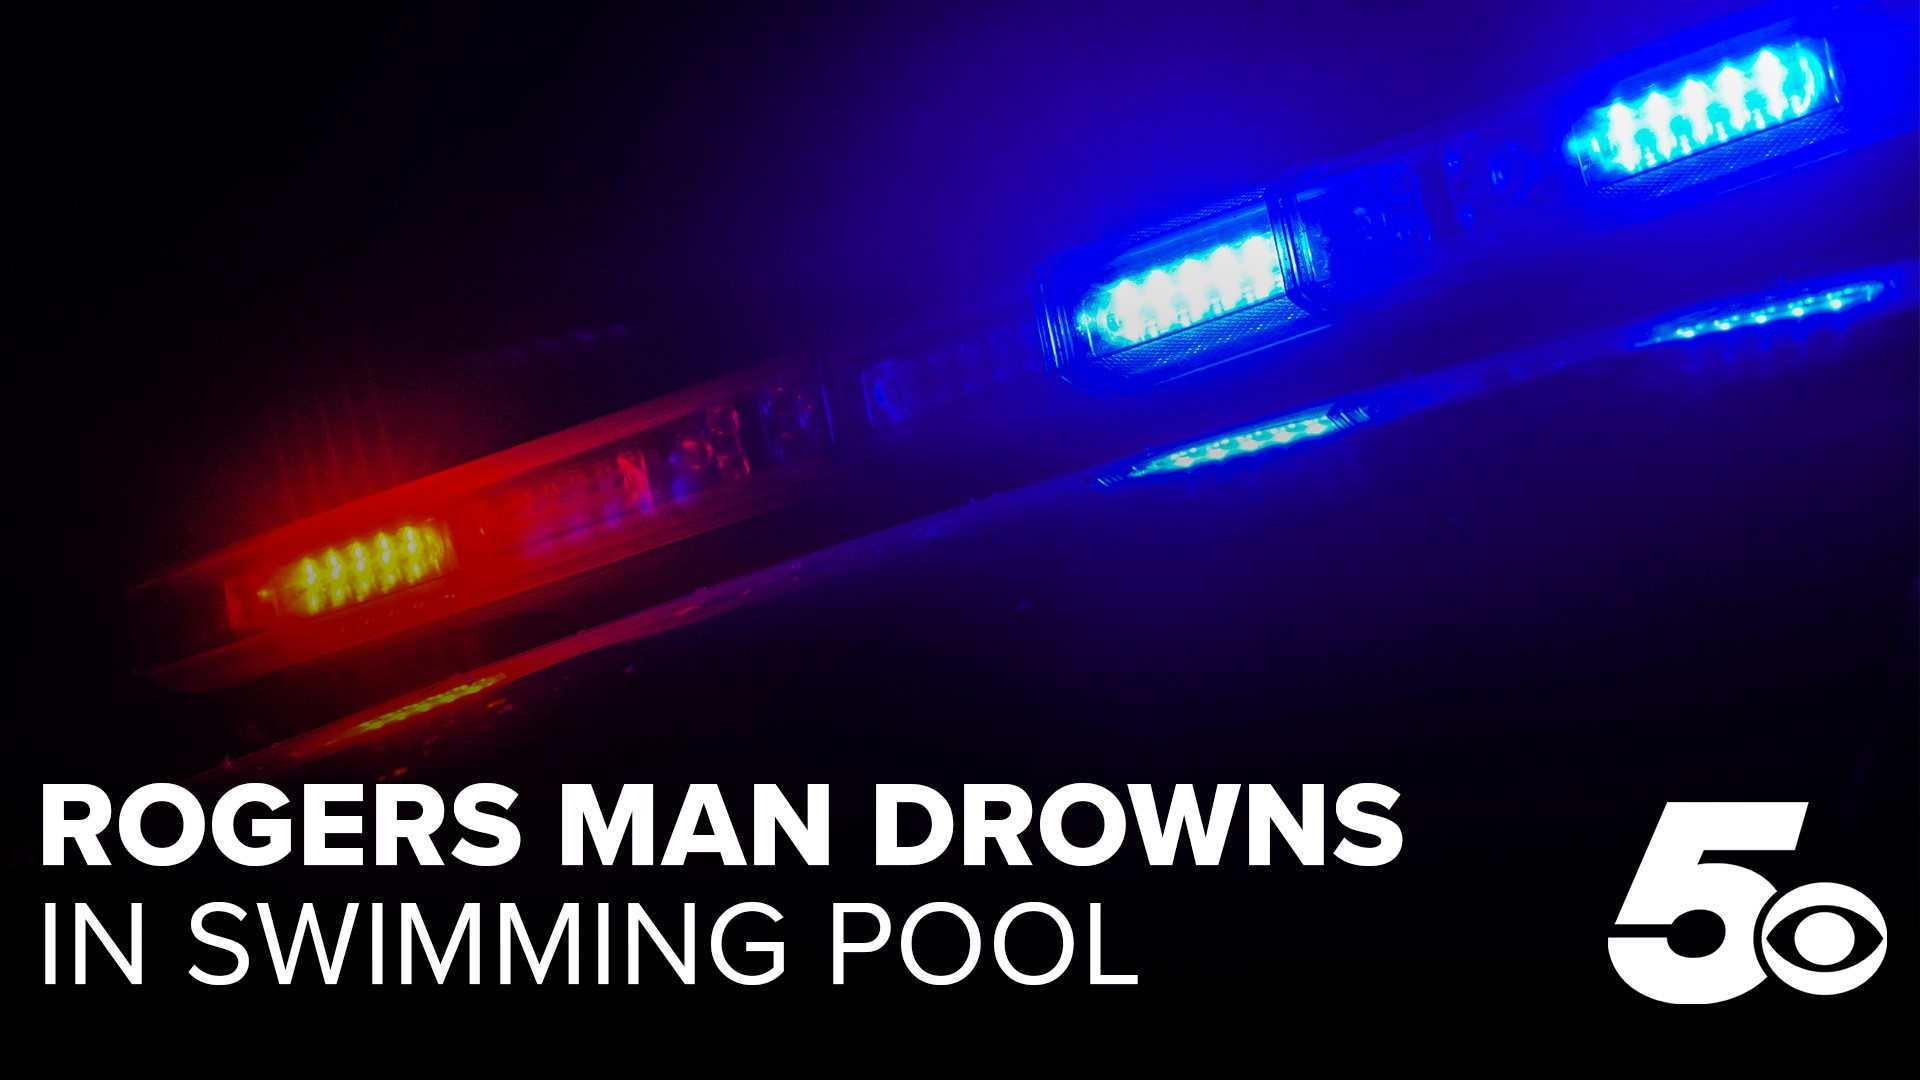 A 55-year-old man drowned in a pool in Rogers on Sunday, Aug. 20.